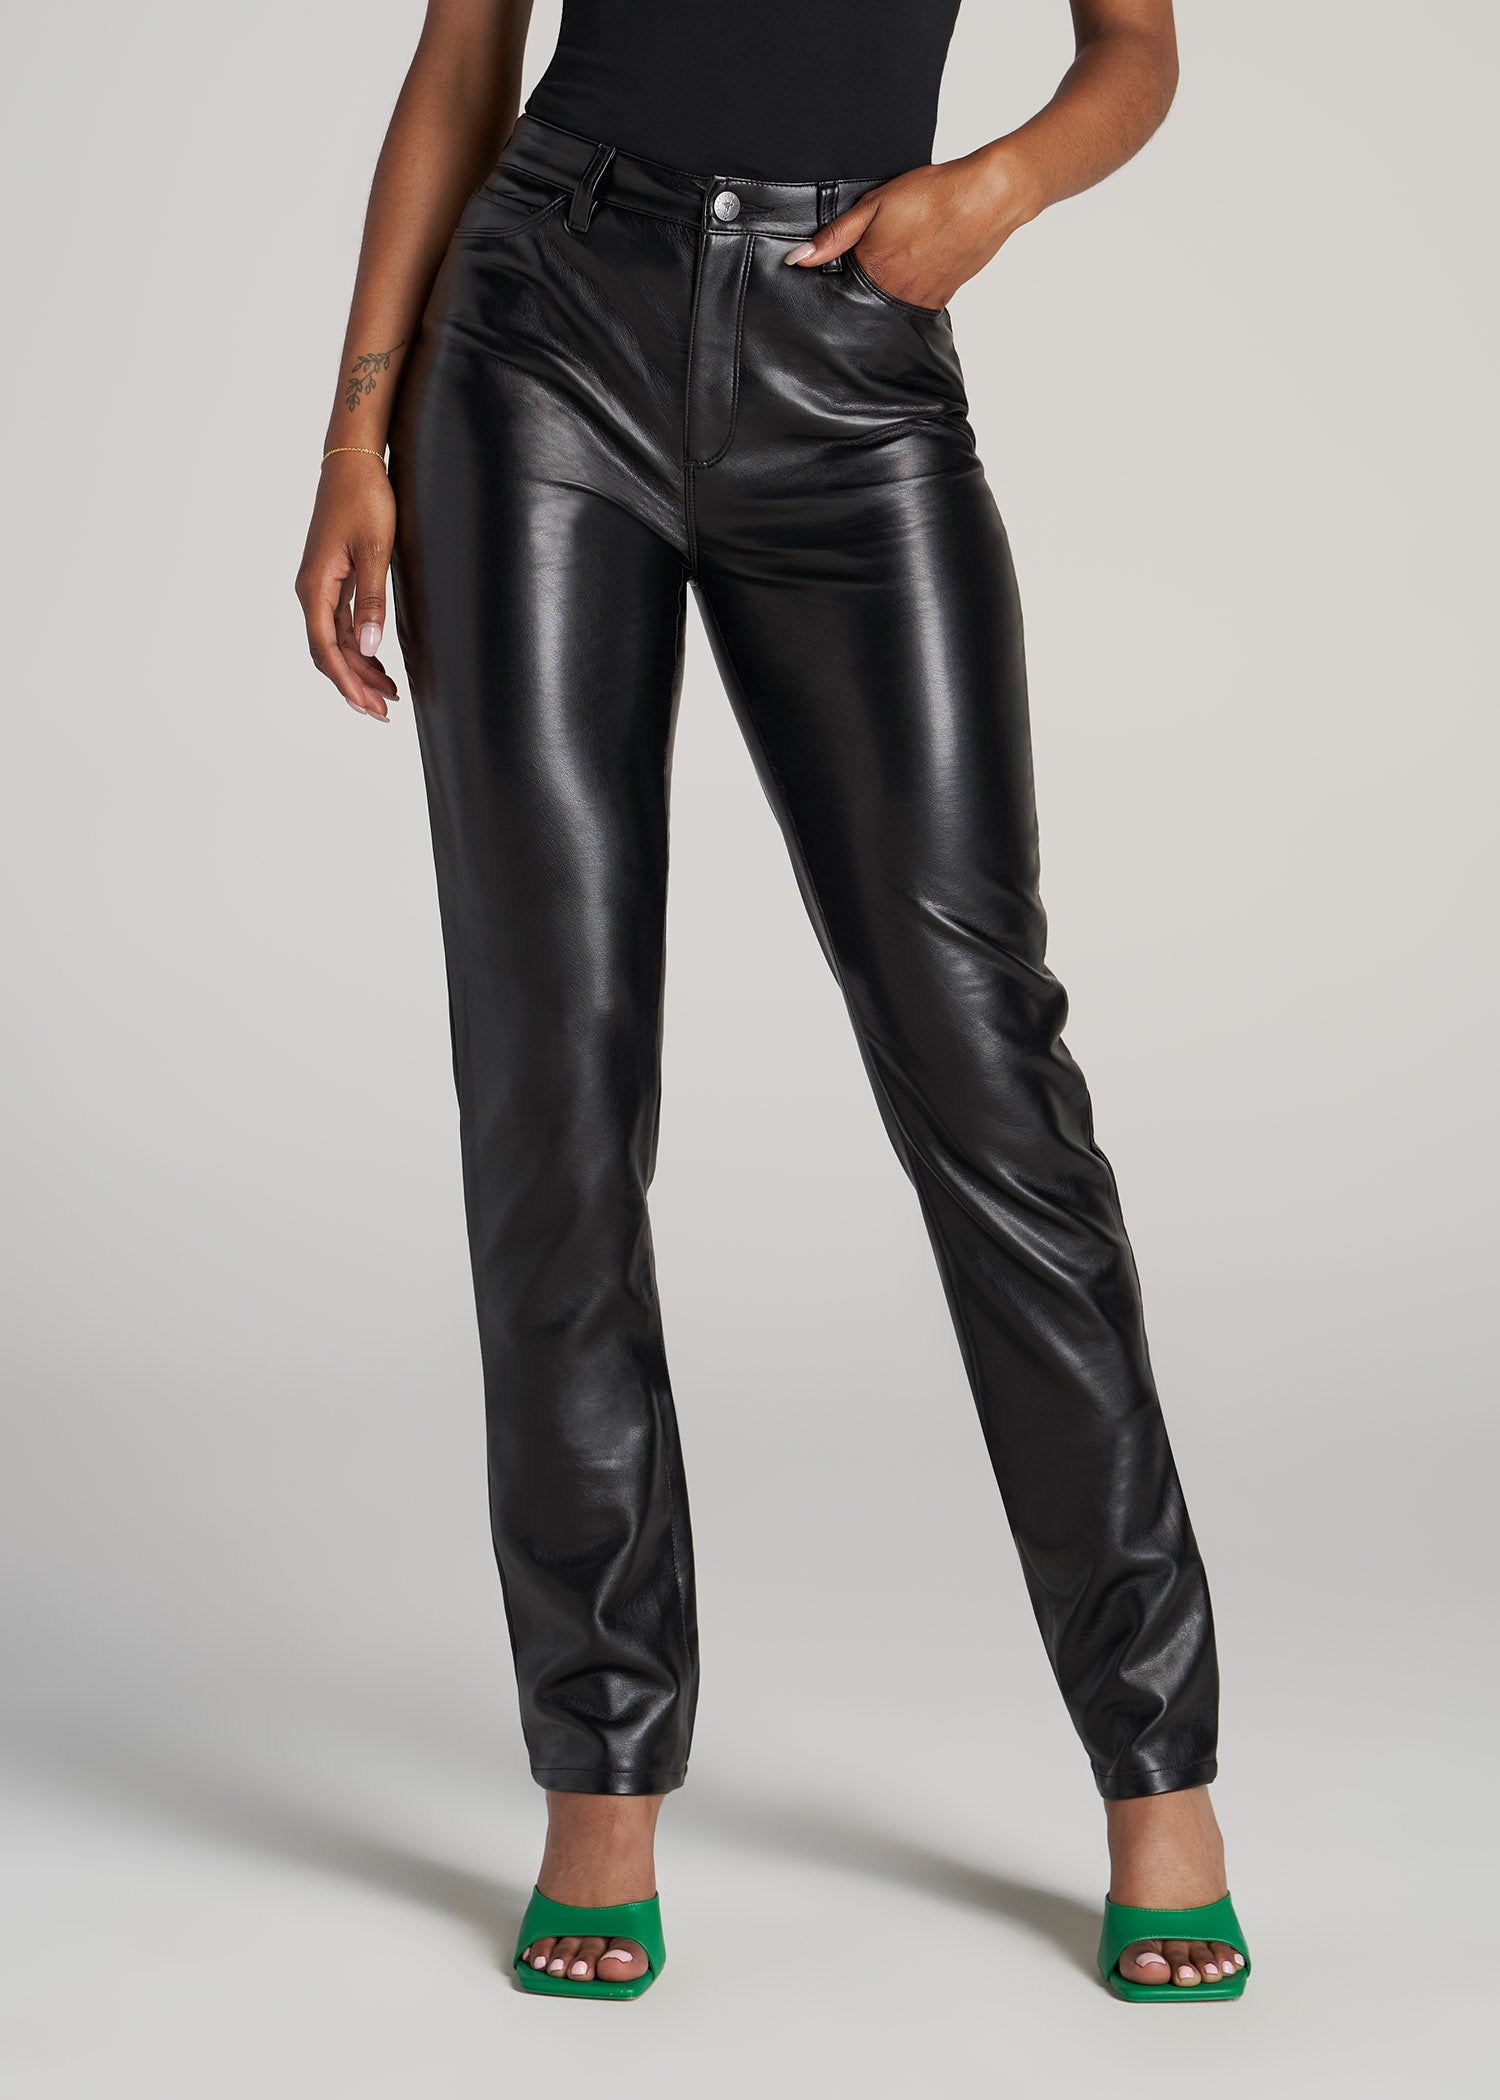 Tight leather pants, blouse, high heels - leather outfit